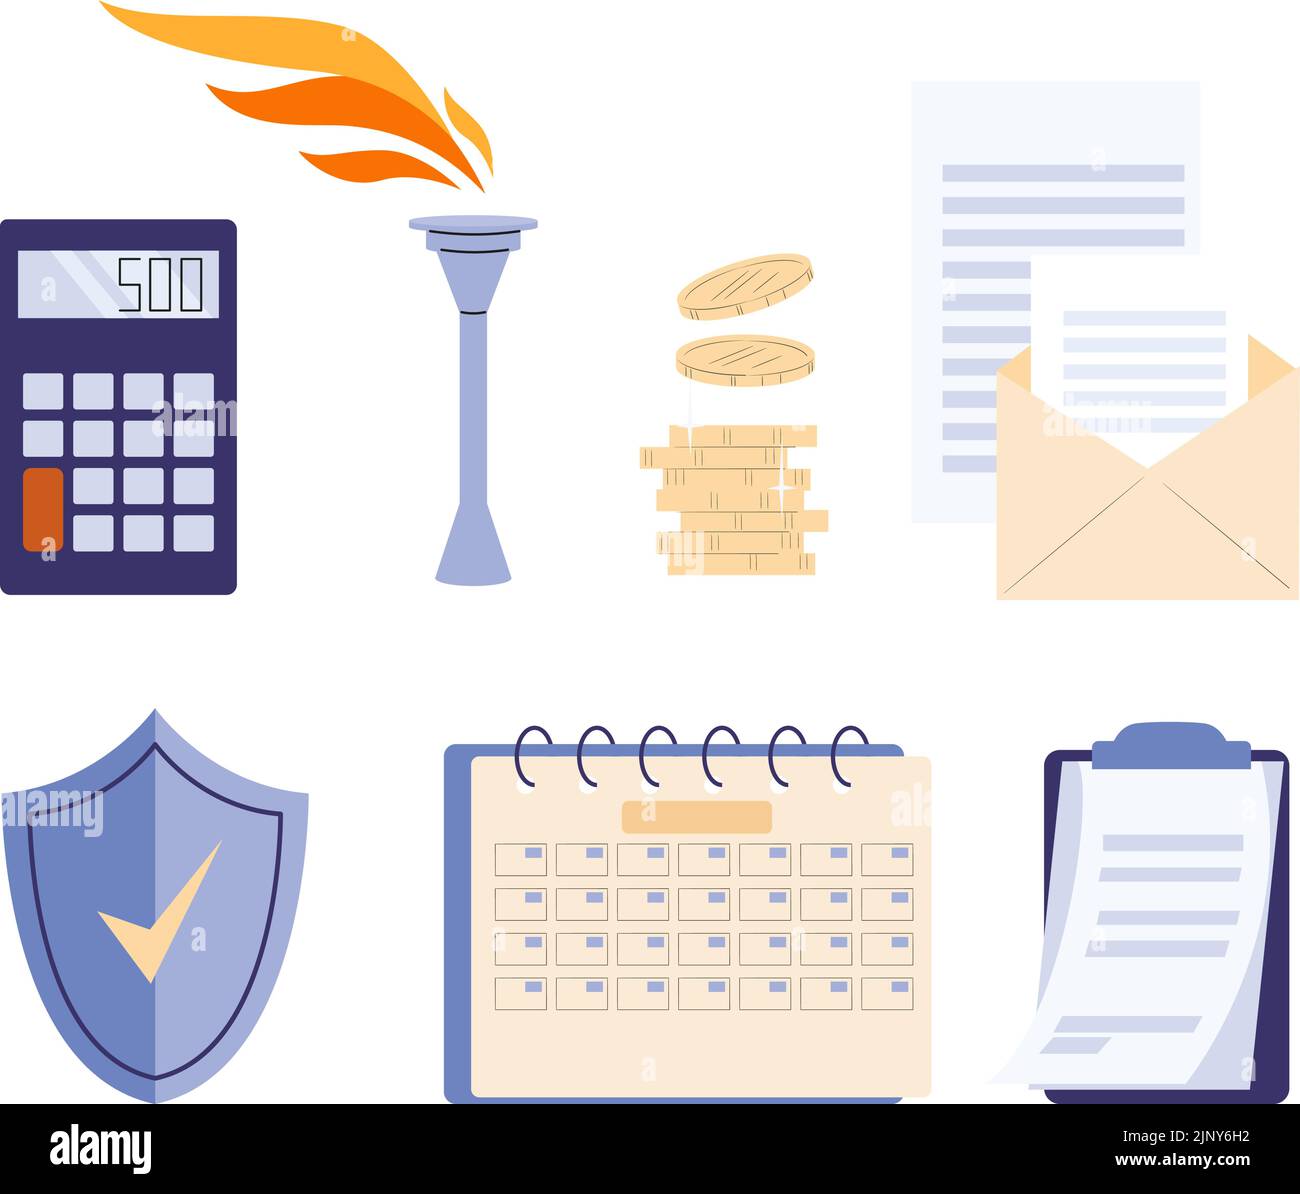 Financial business elements. Calculator, burning torch, money coins, mail with report and daily monthly planner flat vector icons Stock Vector